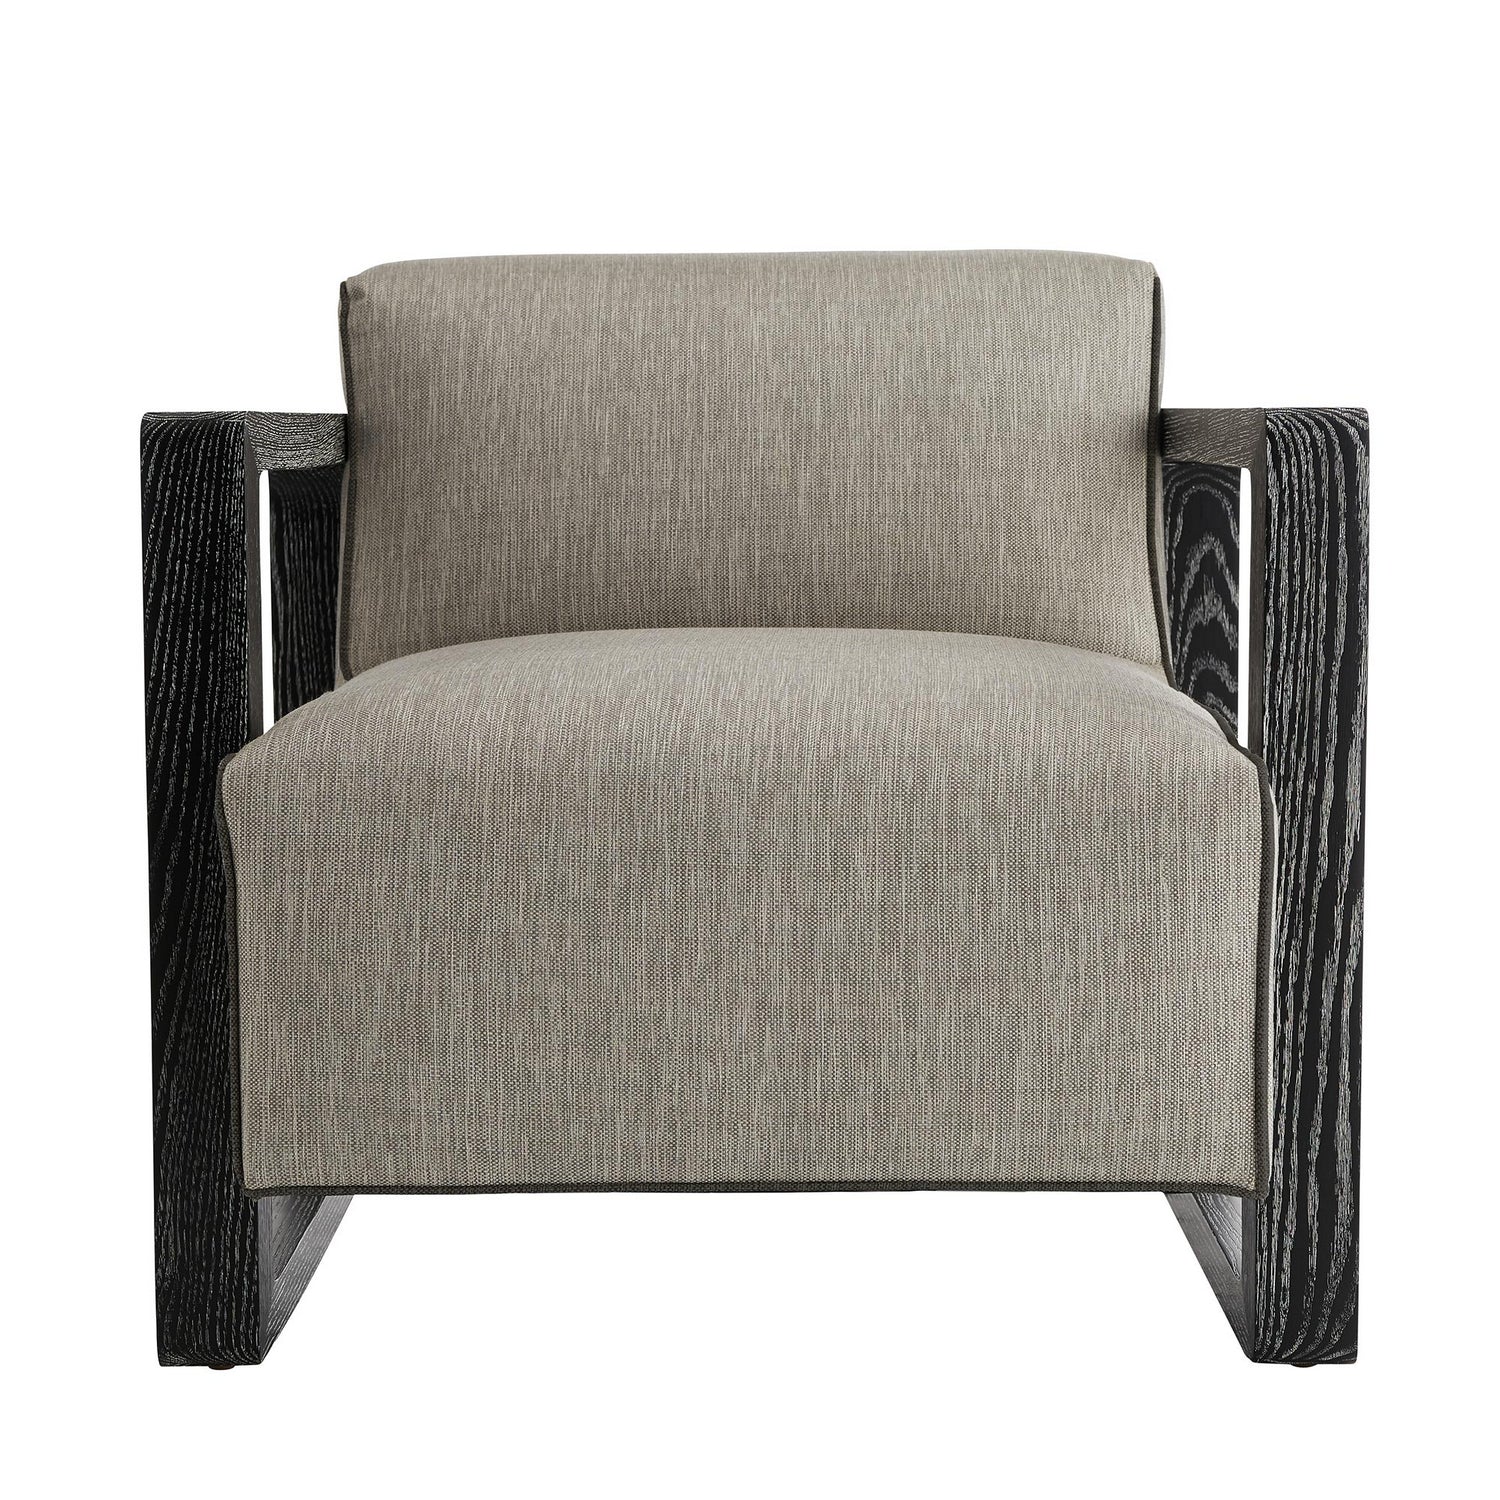 Chair from the Duran collection in Fossil finish